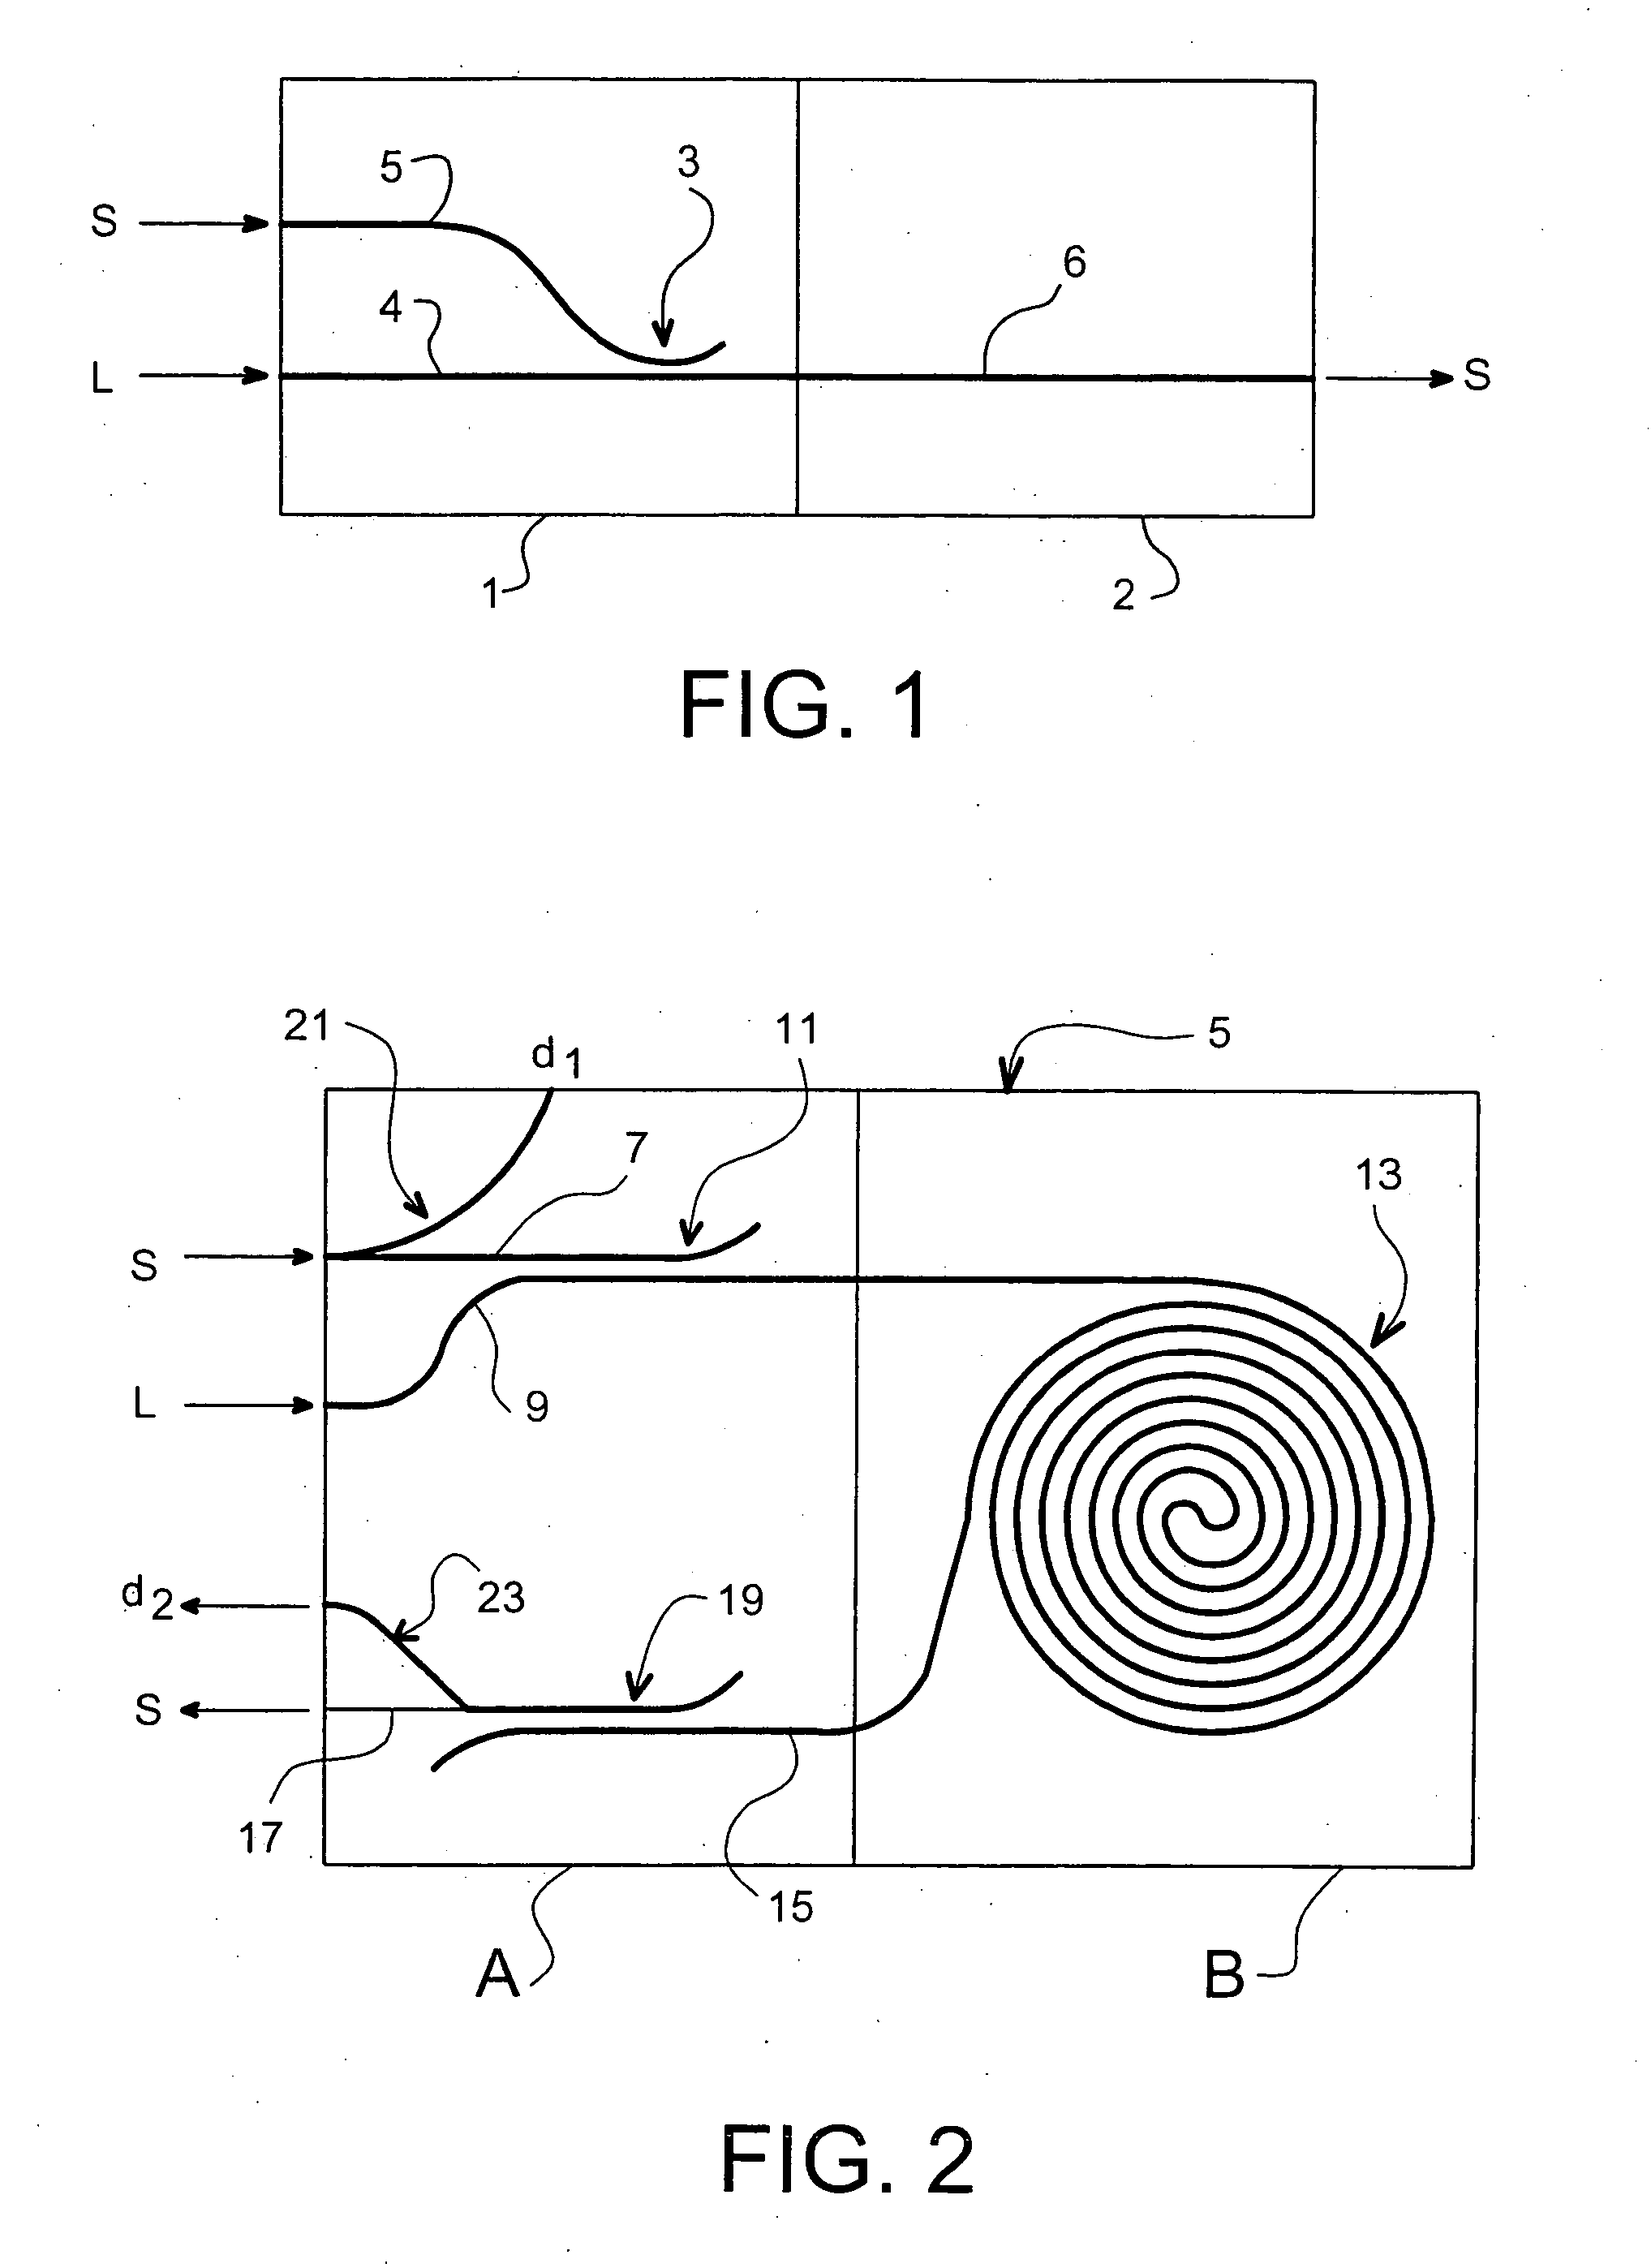 Optical amplification structure with an integrated optical system and amplification housing integrating one such structure